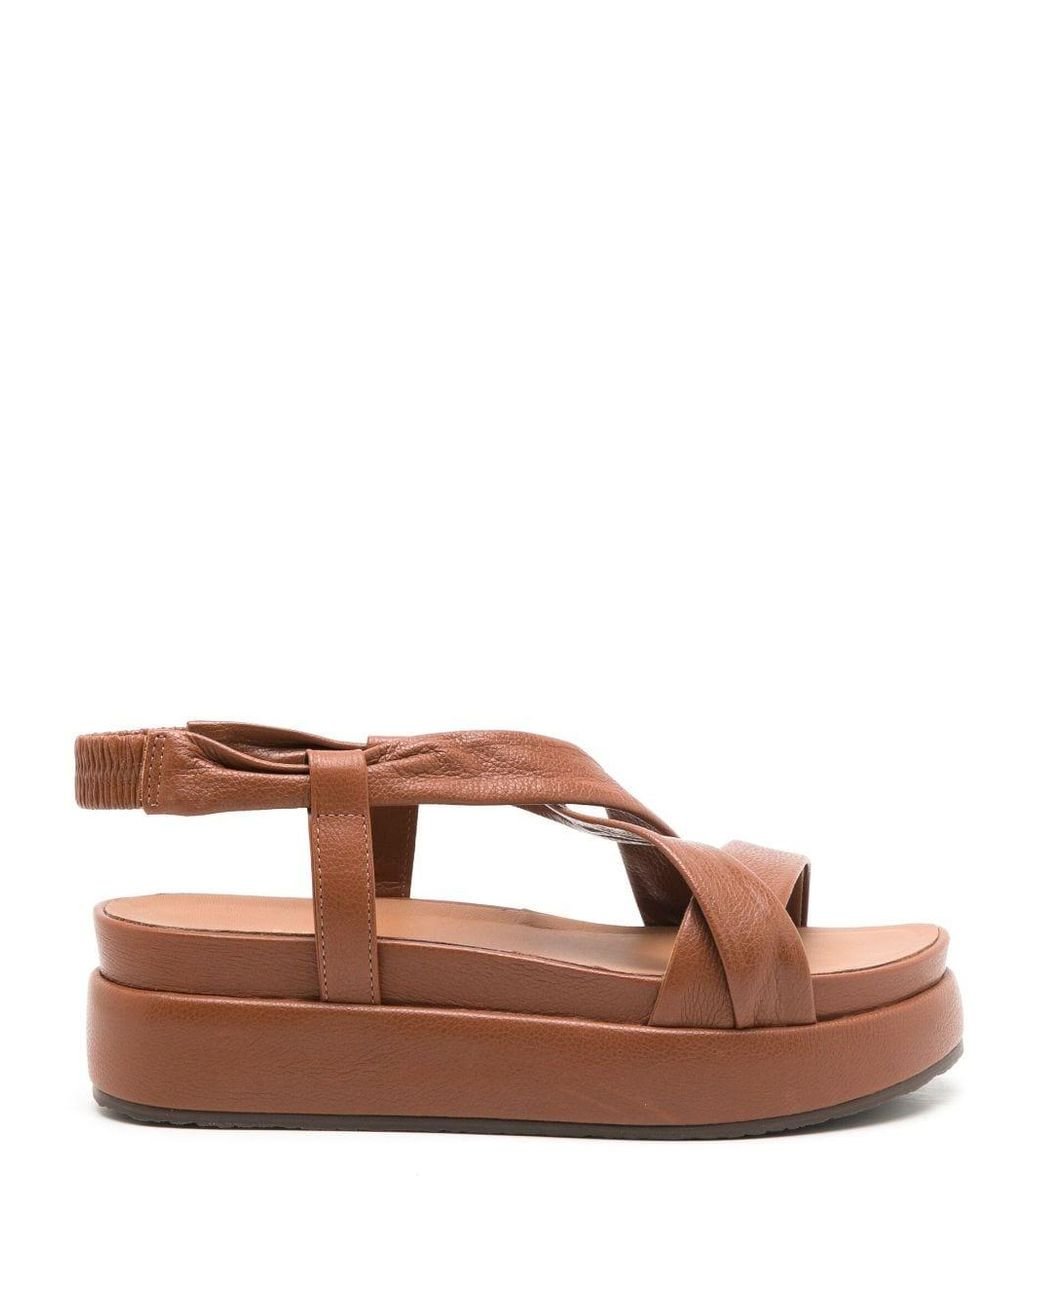 Sarah Chofakian Vionned Leather Platform Sandals in Brown | Lyst